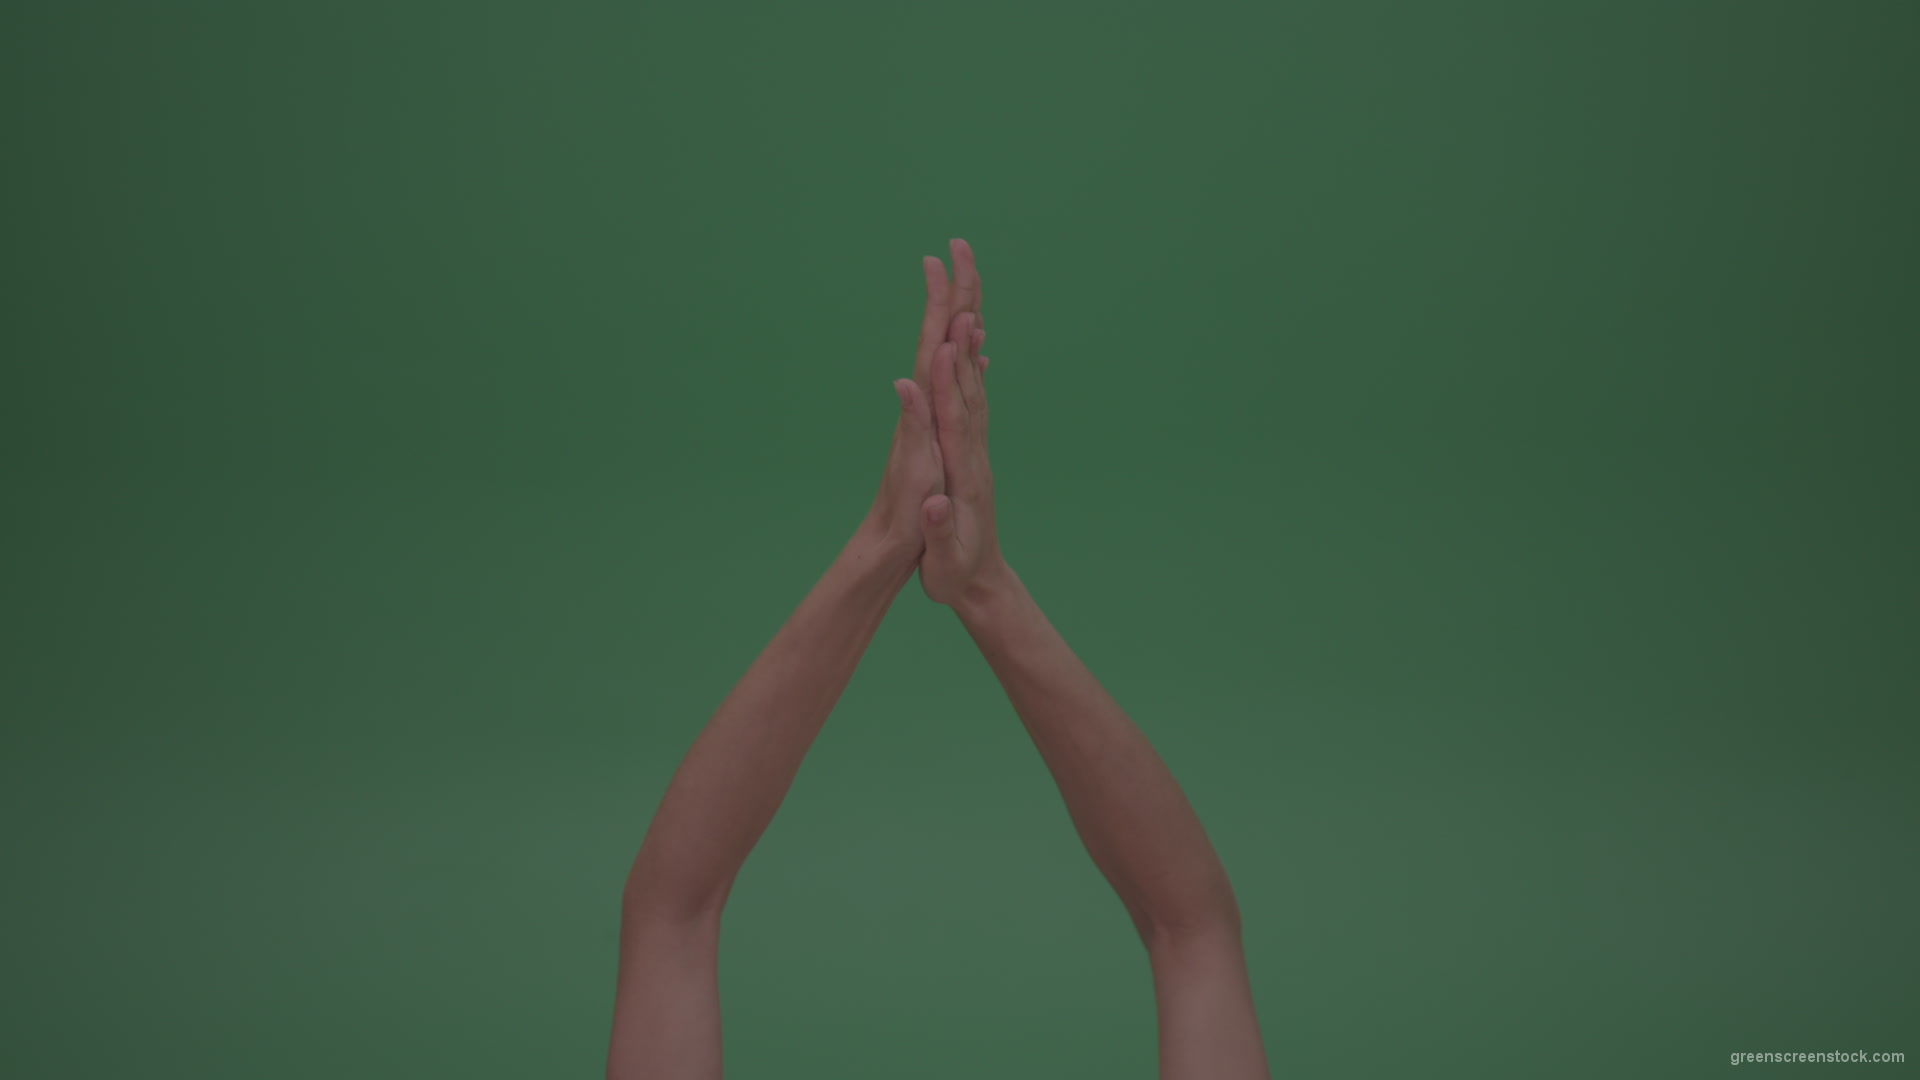 Rapidly-Clapping-Young-FemaleHands-Ovation-GreenScreenWall-ChromaKey-Background_008 Green Screen Stock